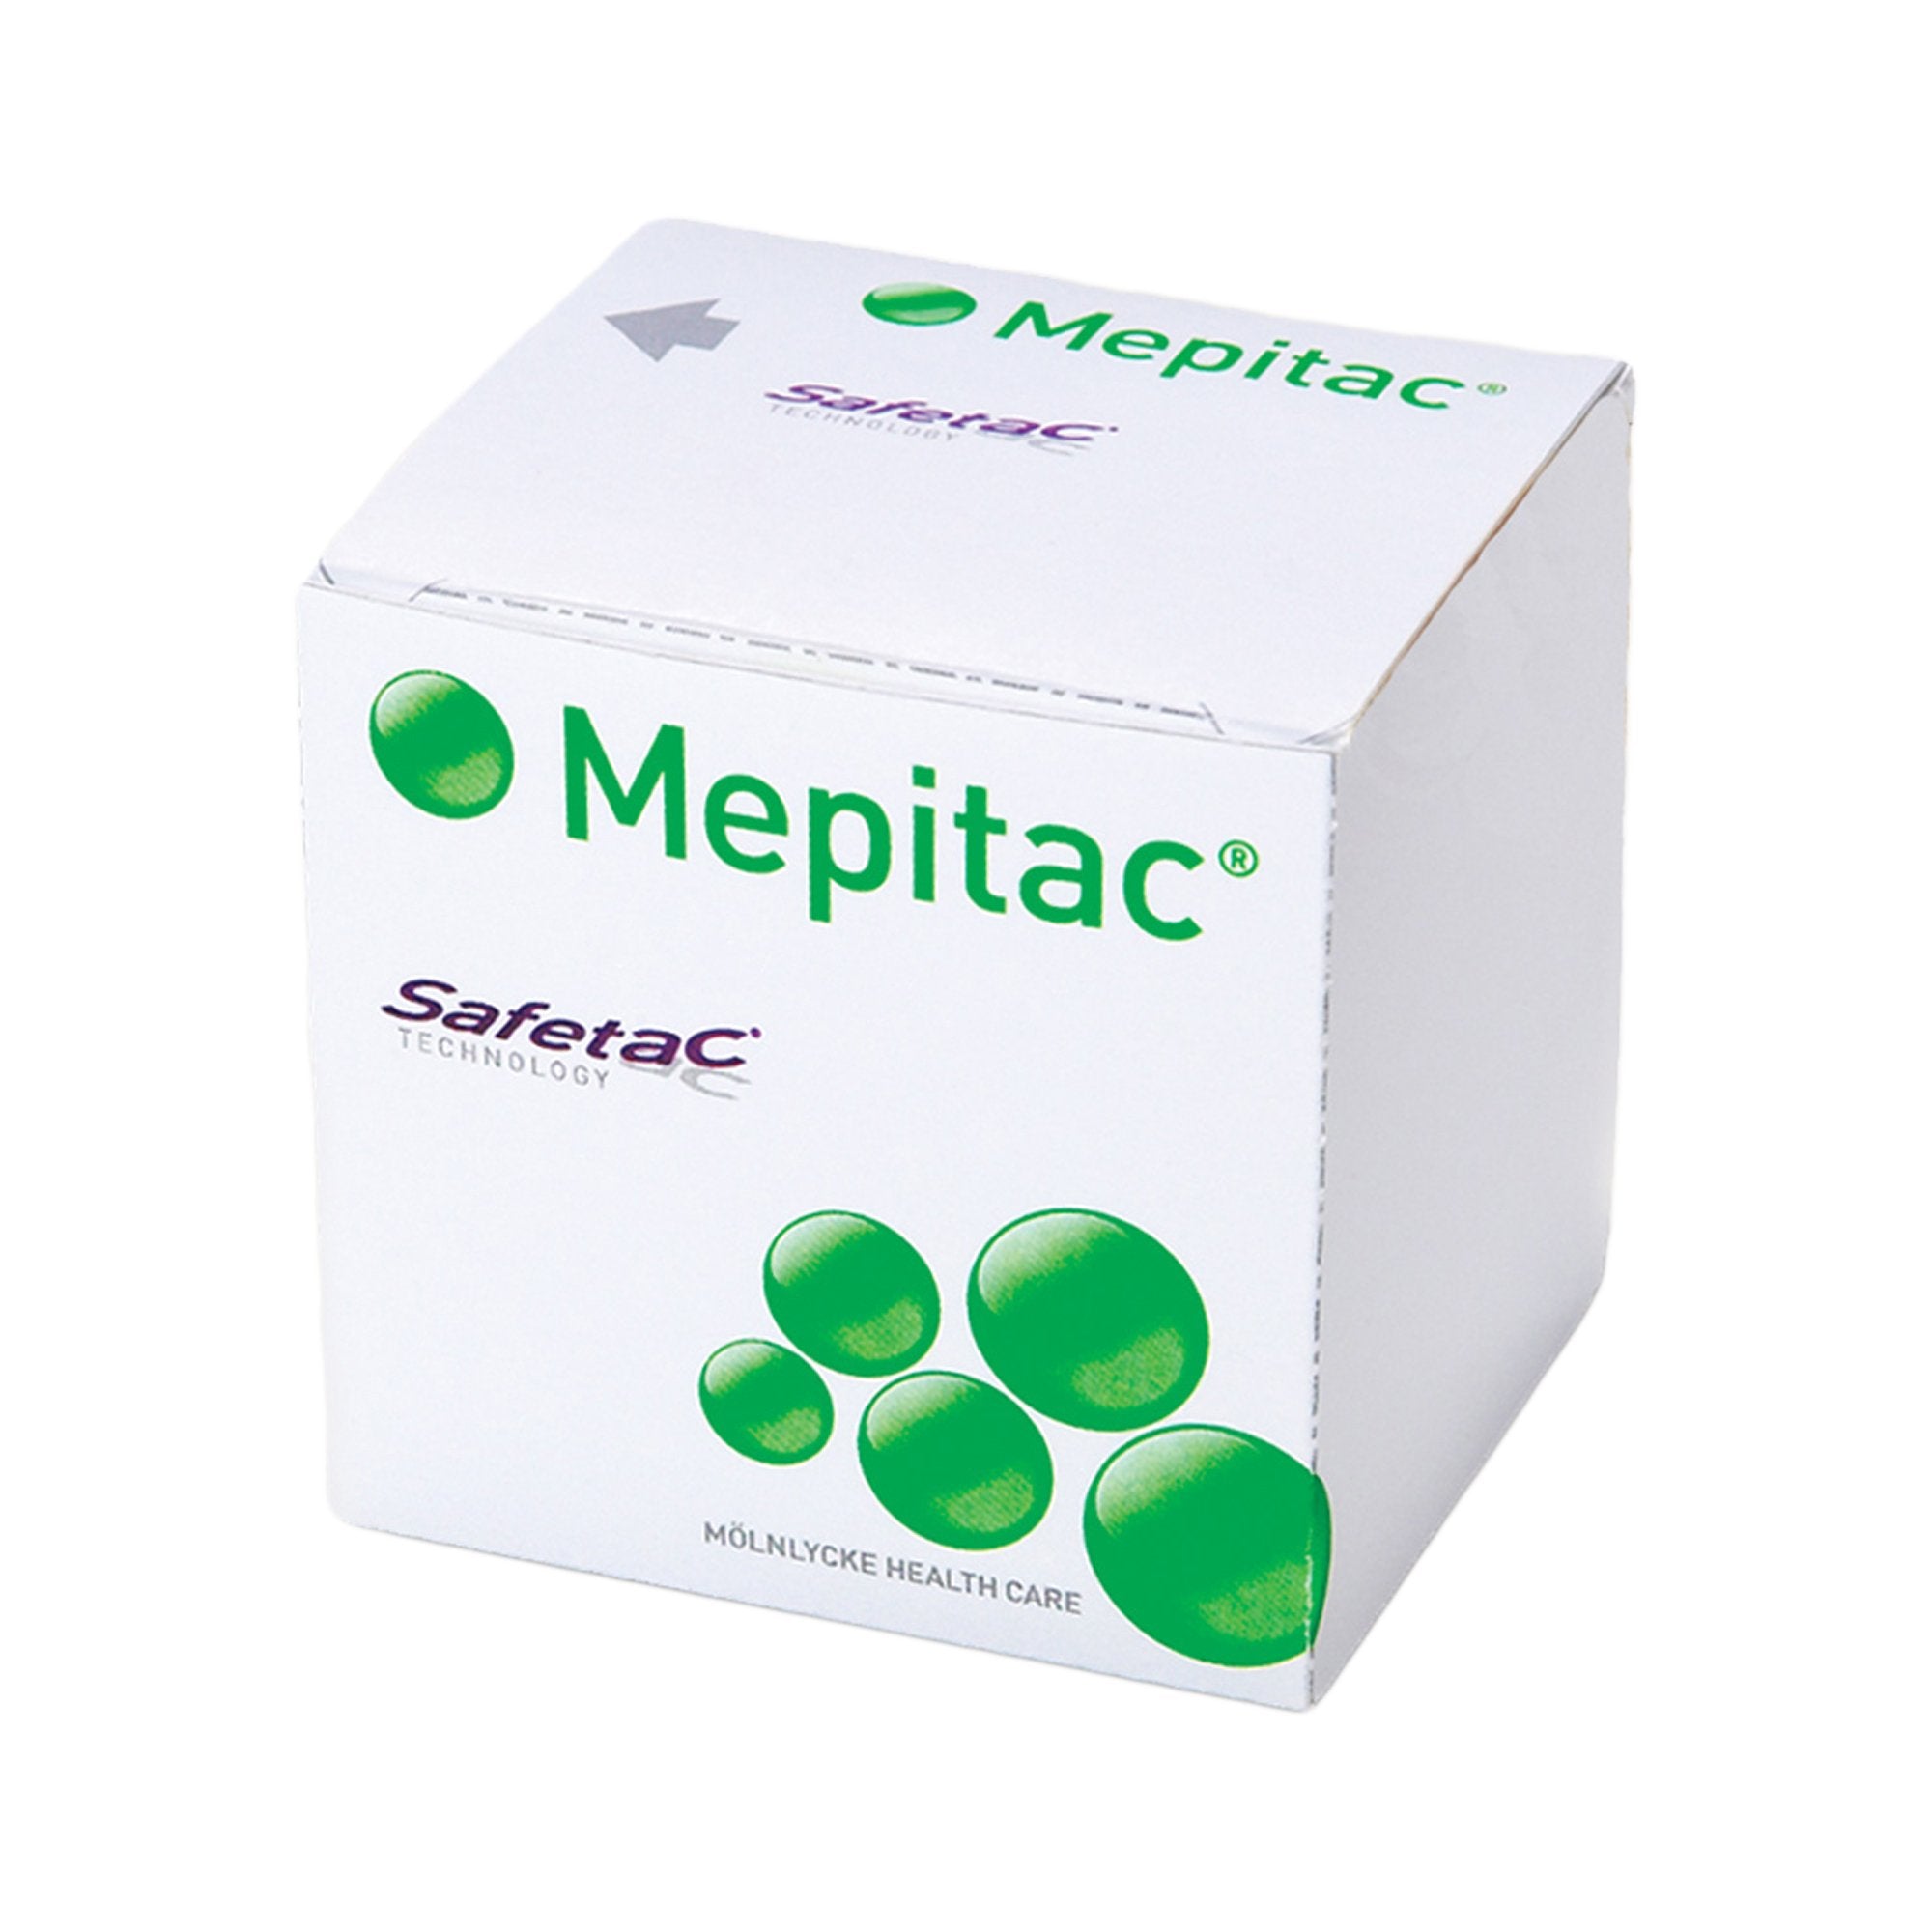 Mepitac® Silicone Medical Tape, 1-1/2 x 59 Inch, Tan (1 Unit)